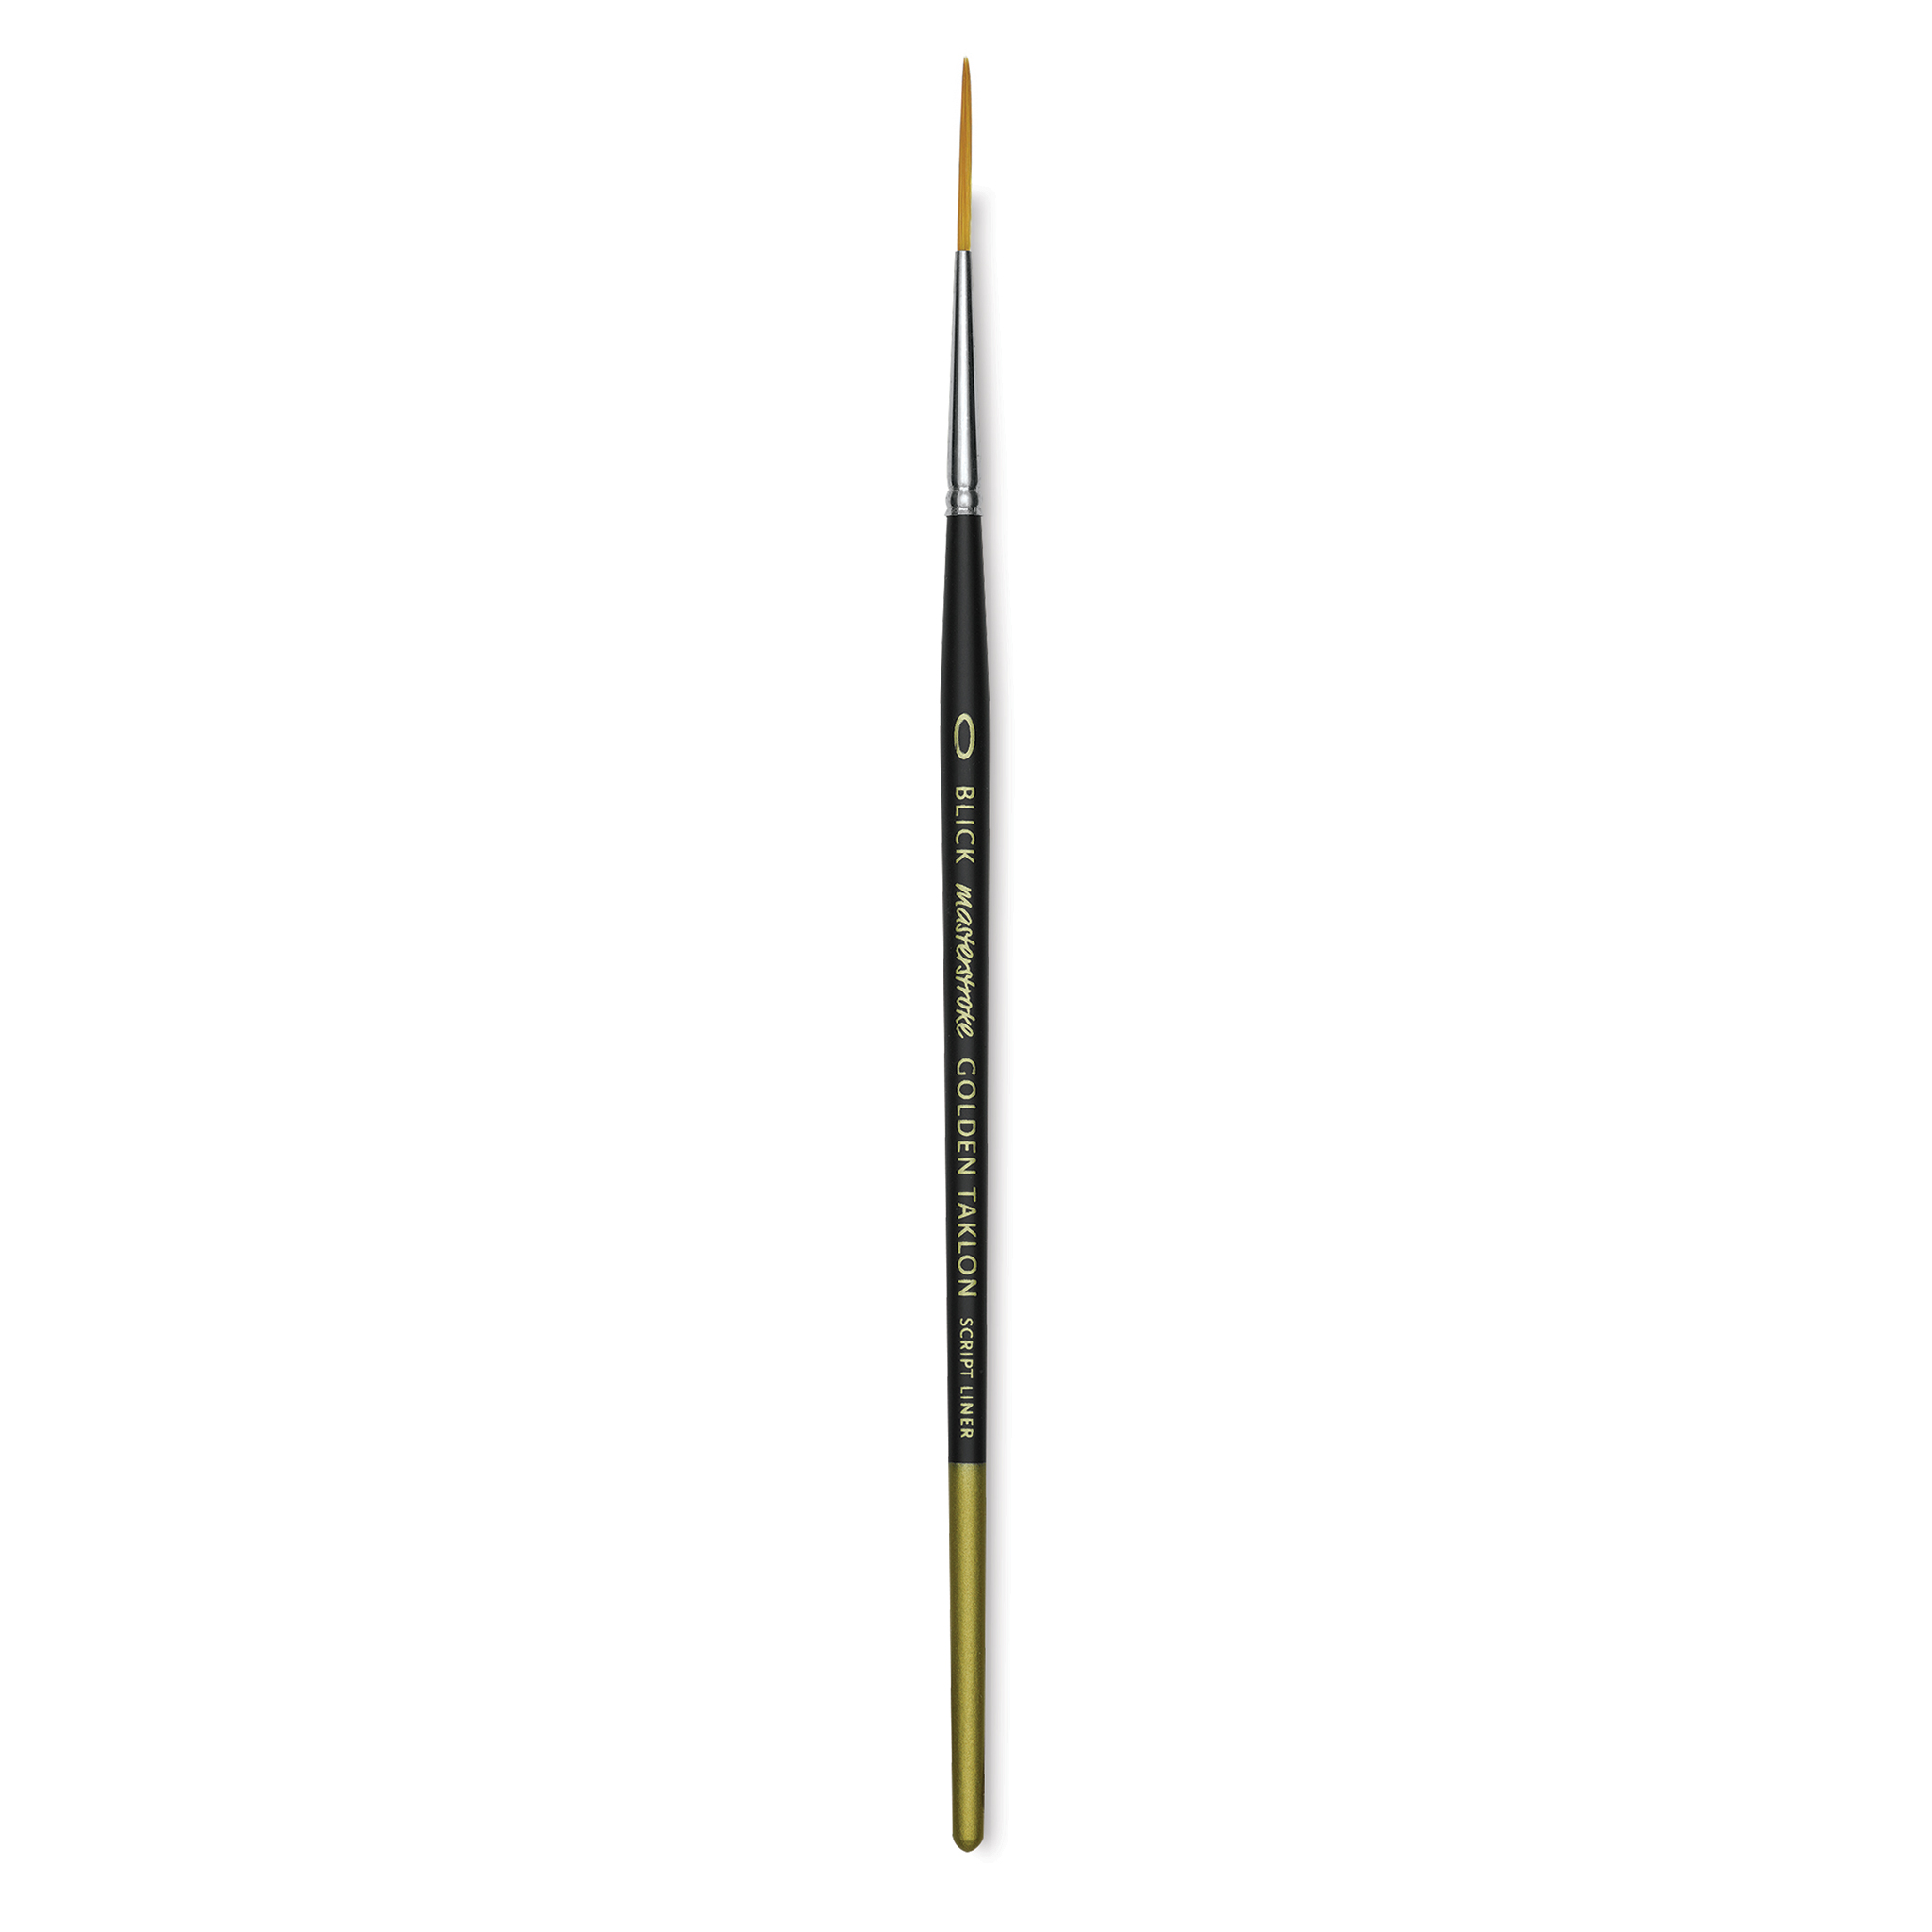 Golden Taklon Liner-10/0 Brush by Brushes and More